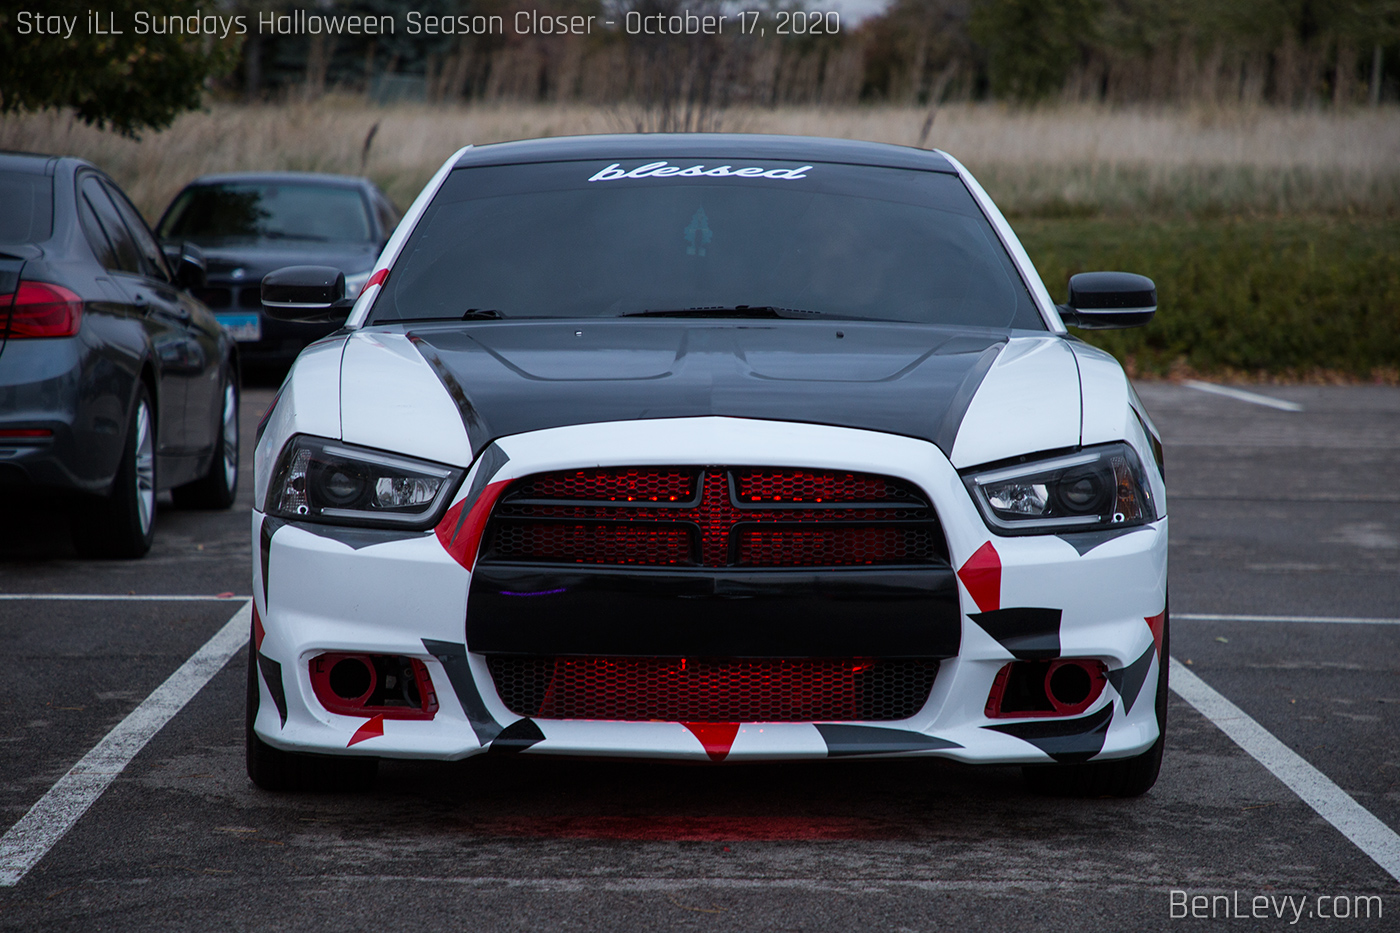 Dodge Charger with menacing lights